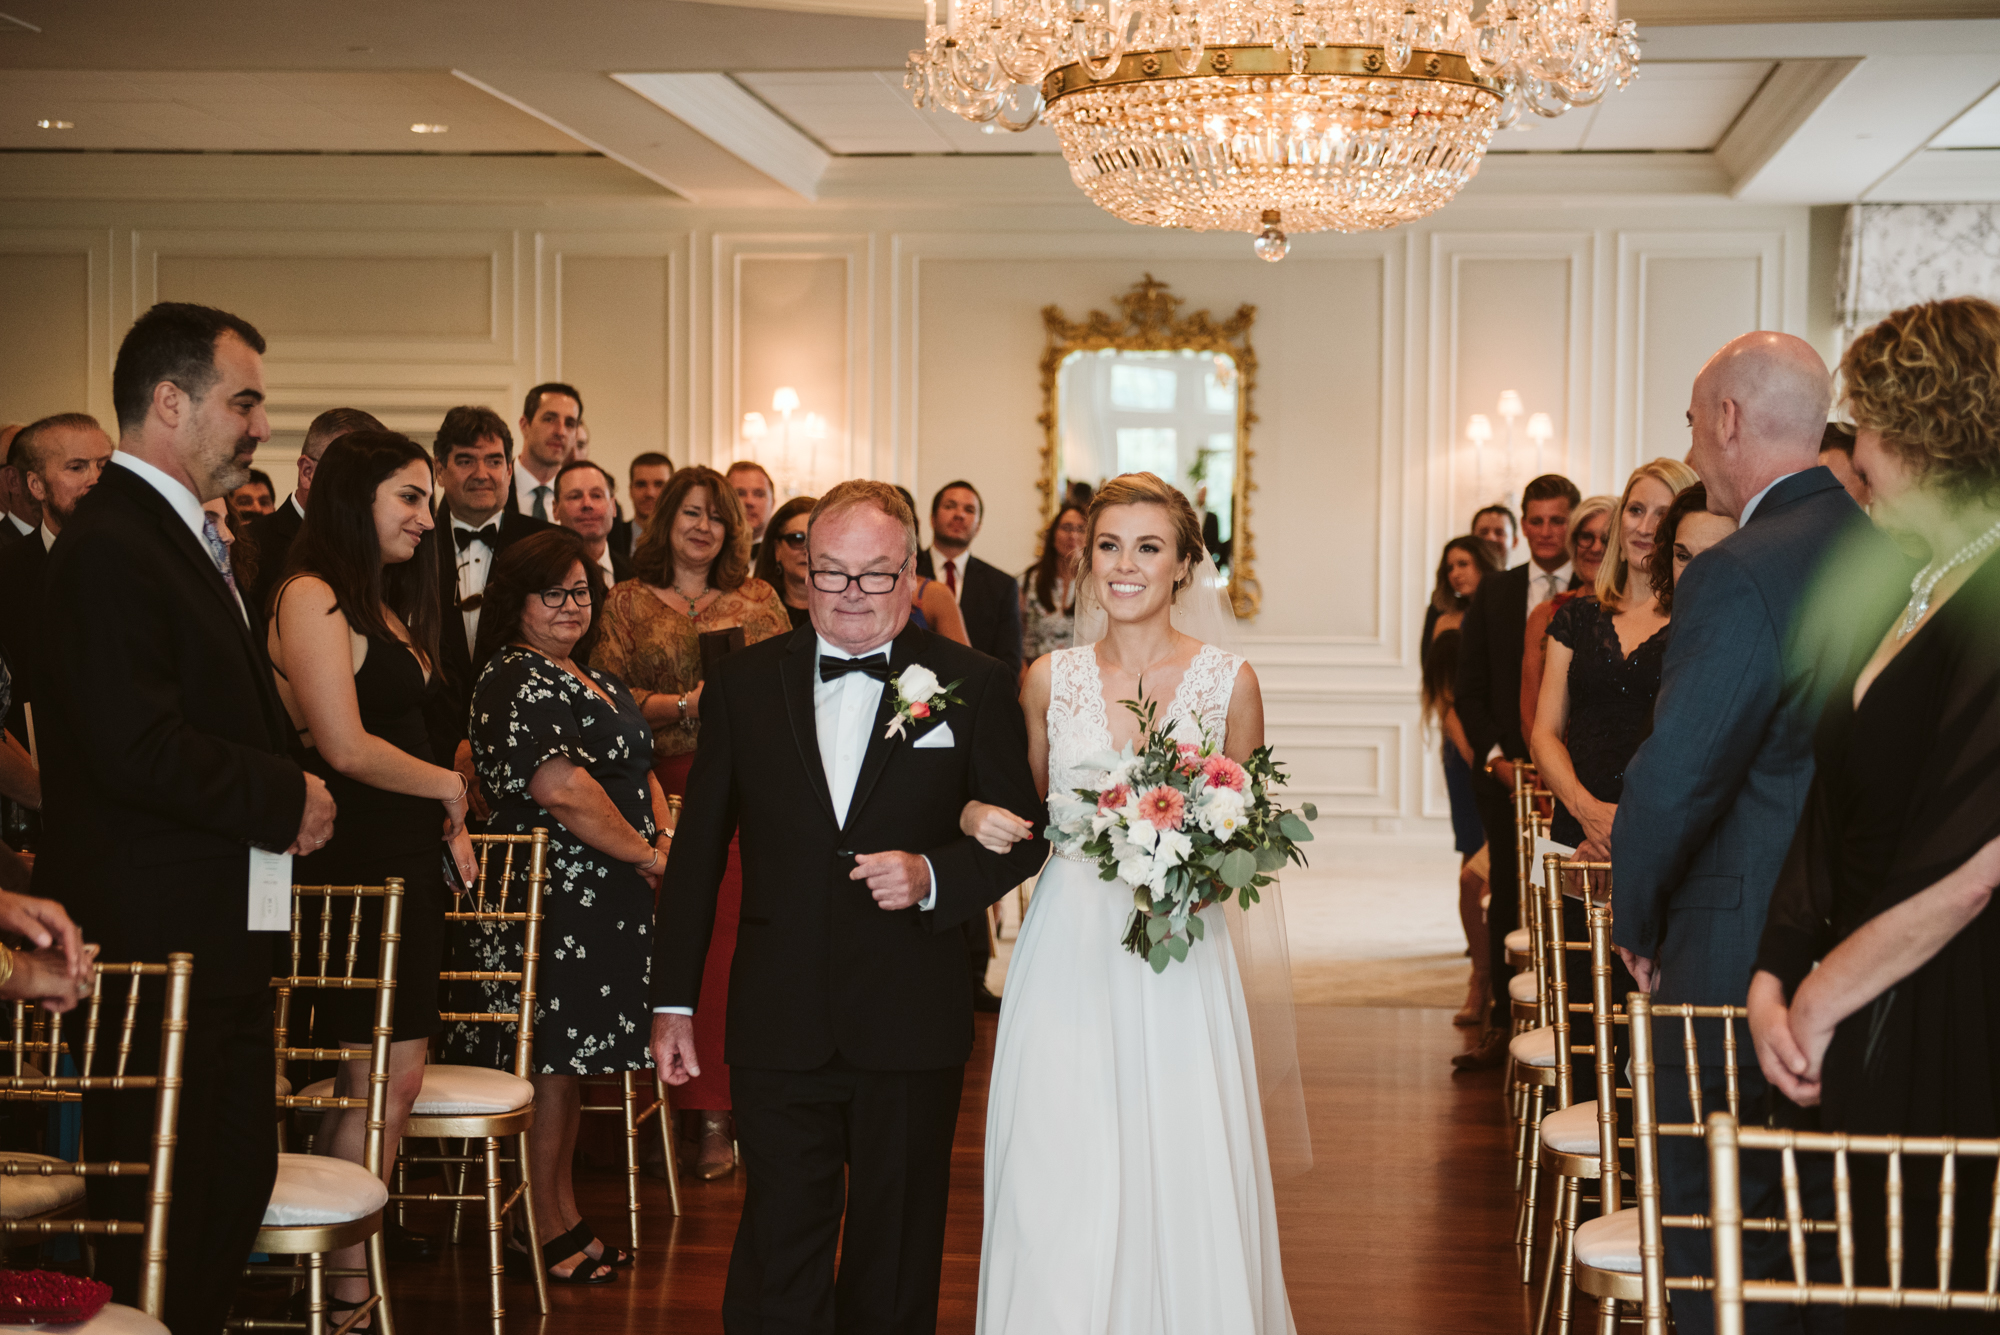 Elegant, Columbia Country Club, Chevy Chase Maryland, Baltimore Wedding Photographer, Classic, Traditional, Bride Walking Down Aisle with Her Father, BHLDN Wedding Dress